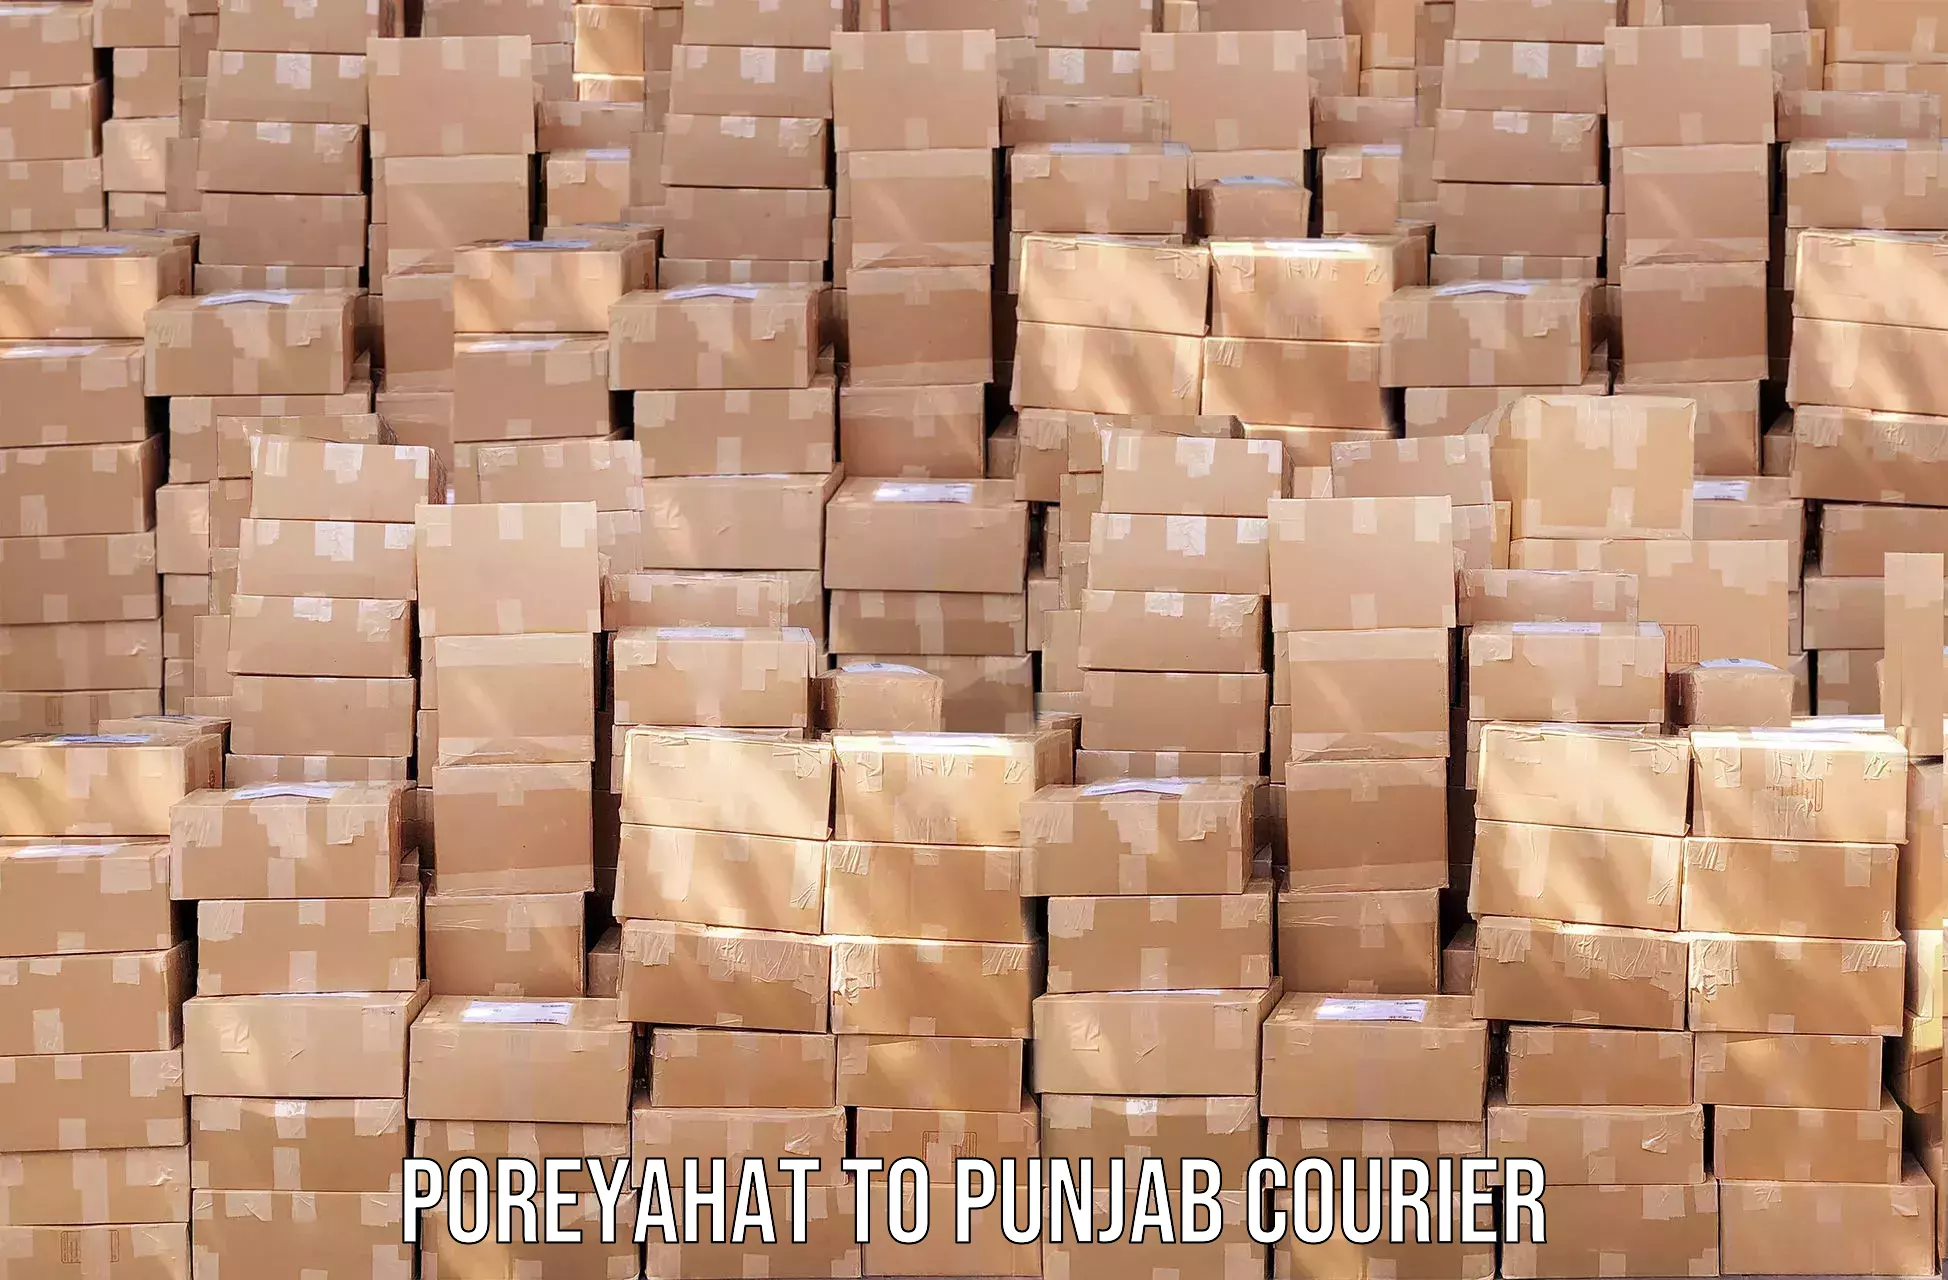 User-friendly courier app Poreyahat to Begowal